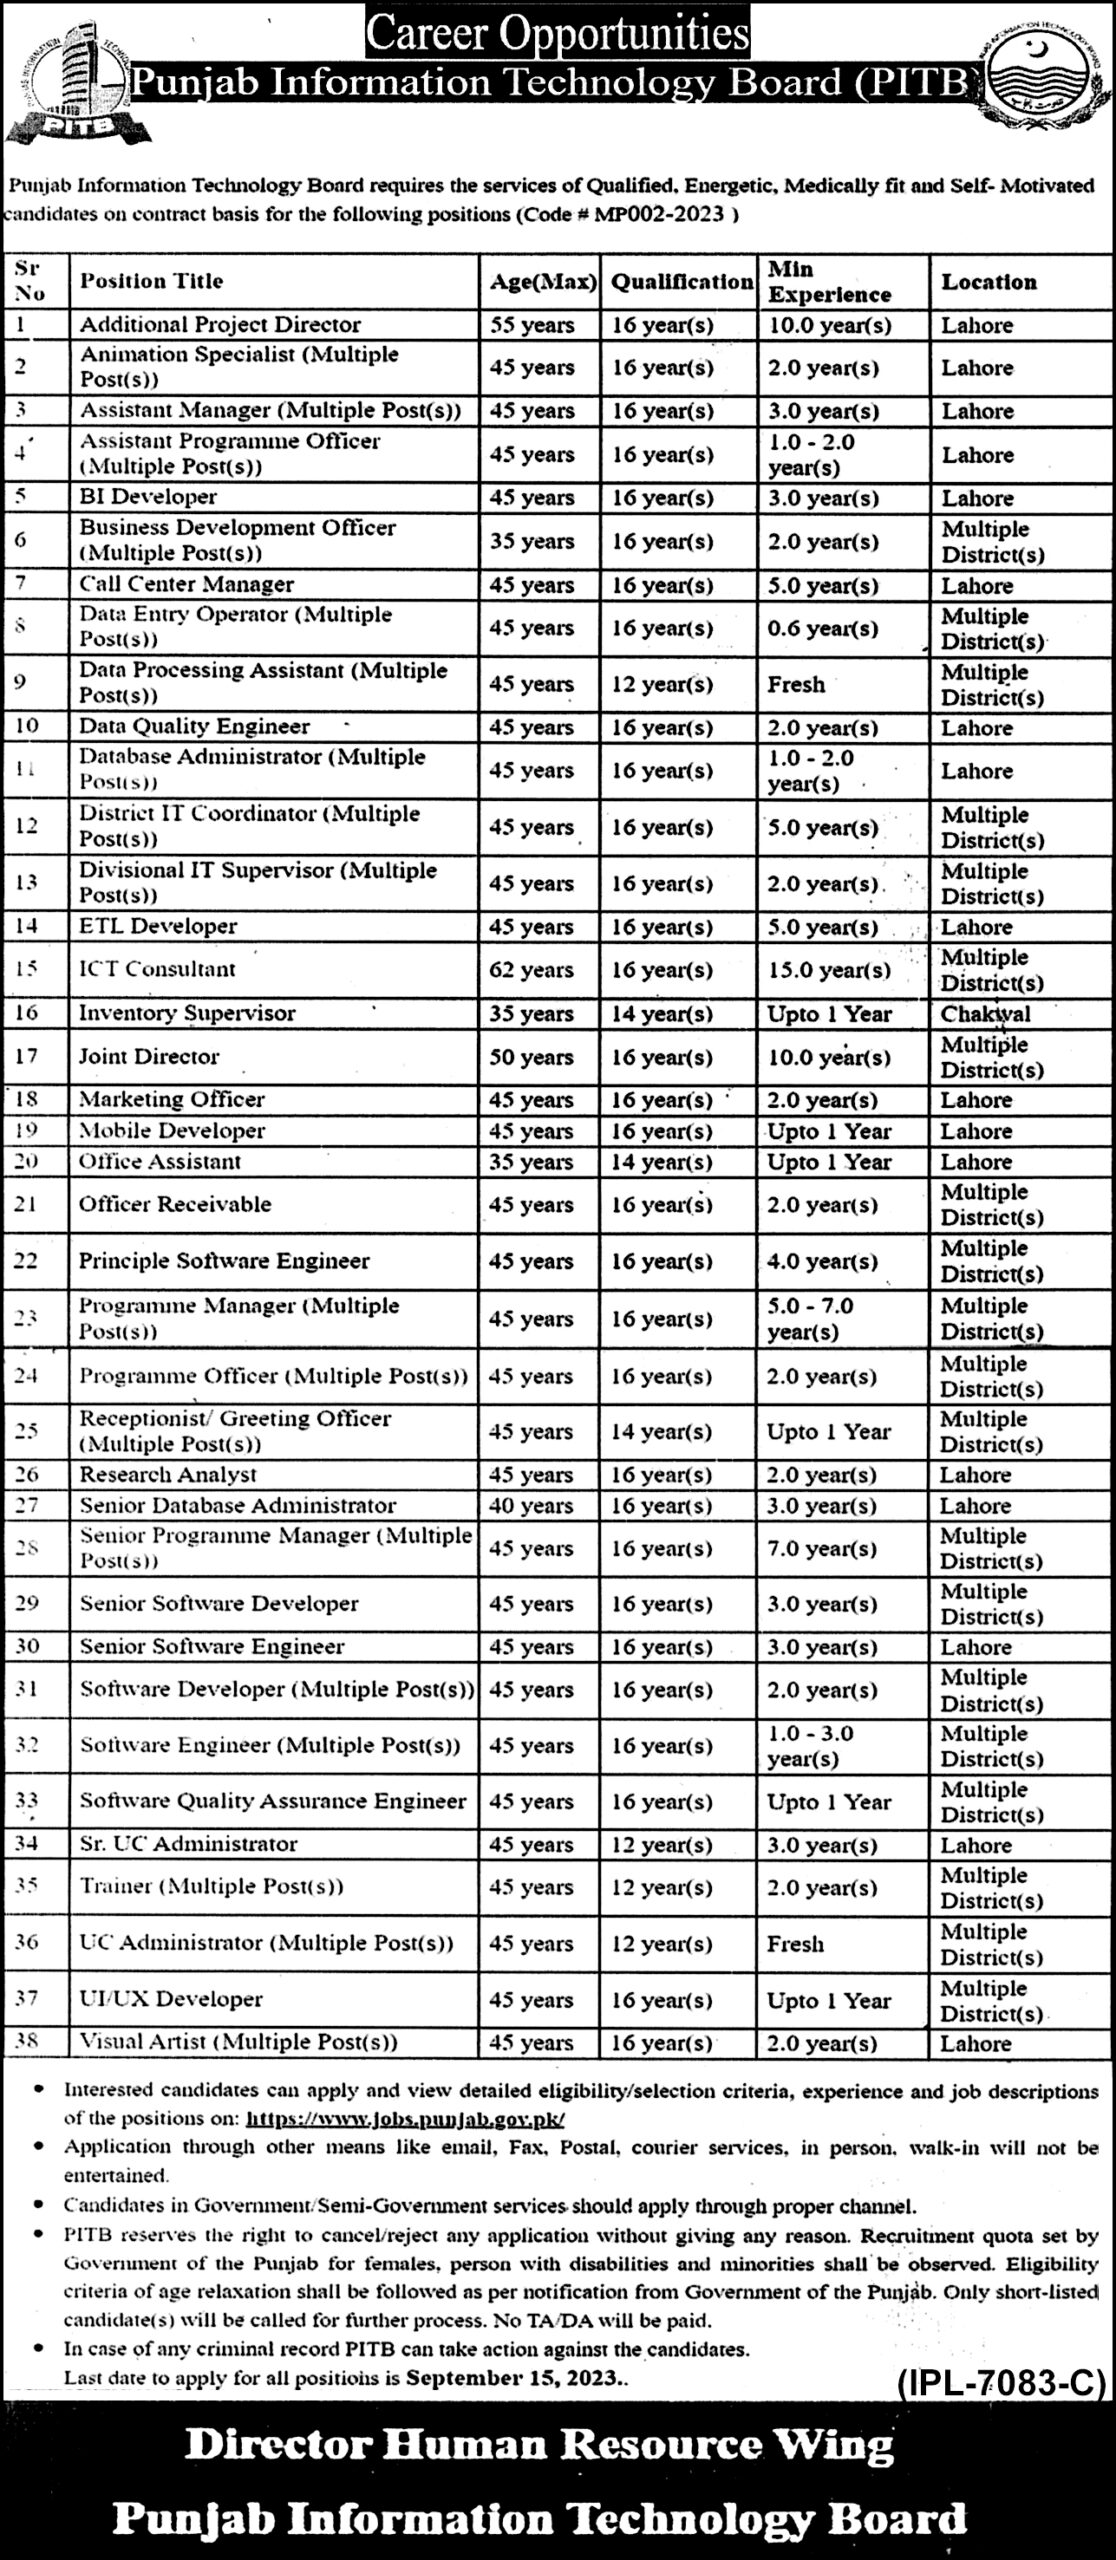 Punjab Information Technology Board PITB Career Opportunities 2023